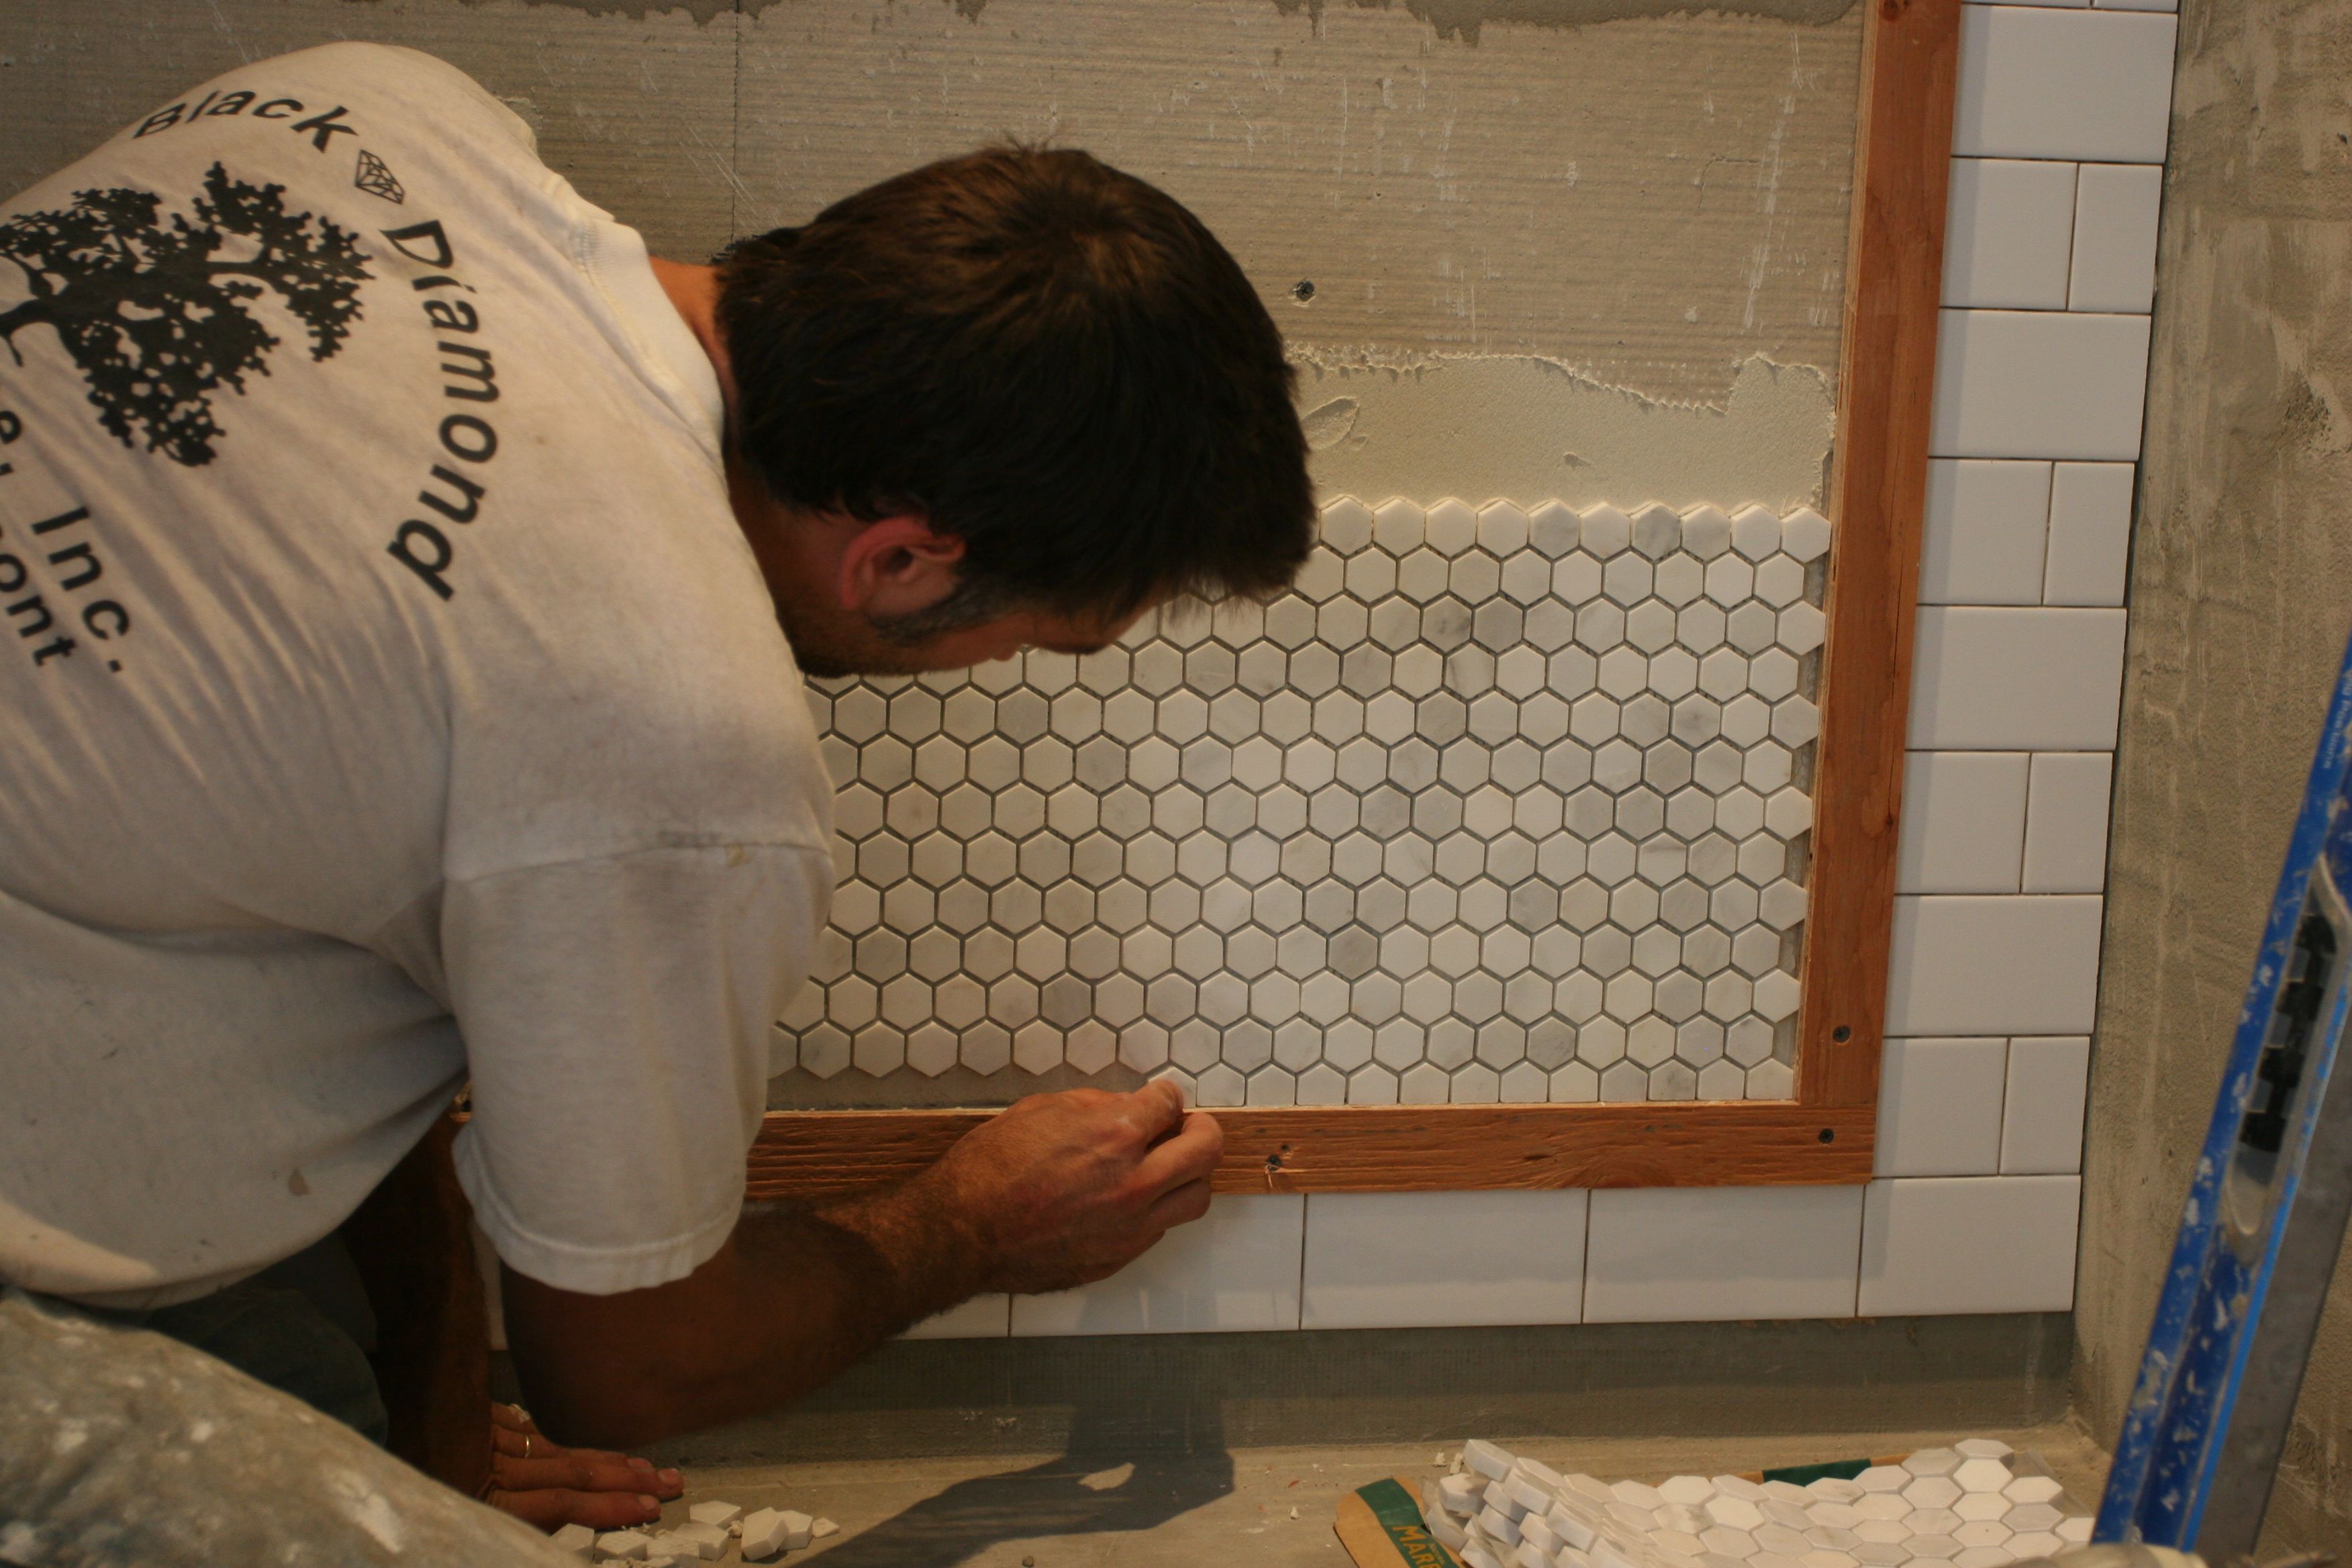 Caleb then had to insert each pre-cut tile into the edges by hand. Thankfully his eye is as skillful as his hand.